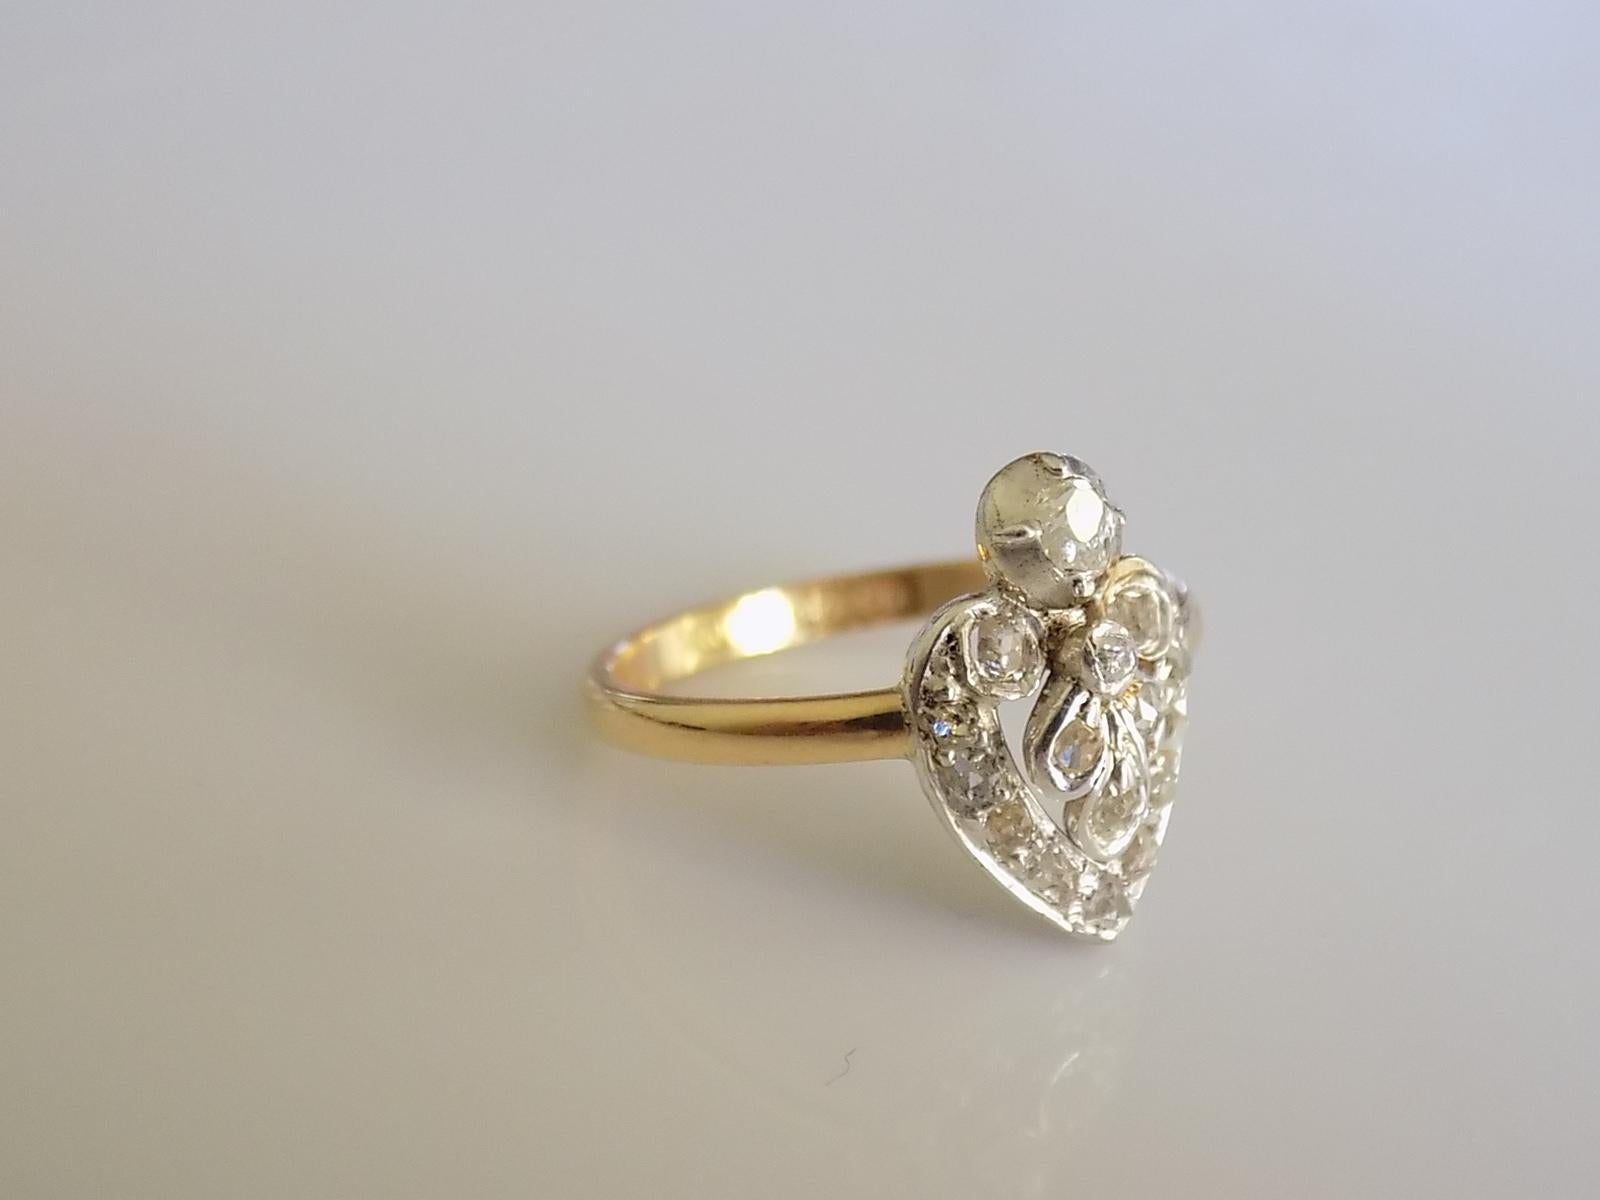 A Lovely Victorian old cut Diamond Heart ring. The stones in Silver setting on later 18 Carat Gold shank. English origin. Rare.
Size J UK, 5 US.
Height of the face 13.5mm.
Weight 2.1gr.
The shank with full London hallmark for 18 Carat Gold.
The ring